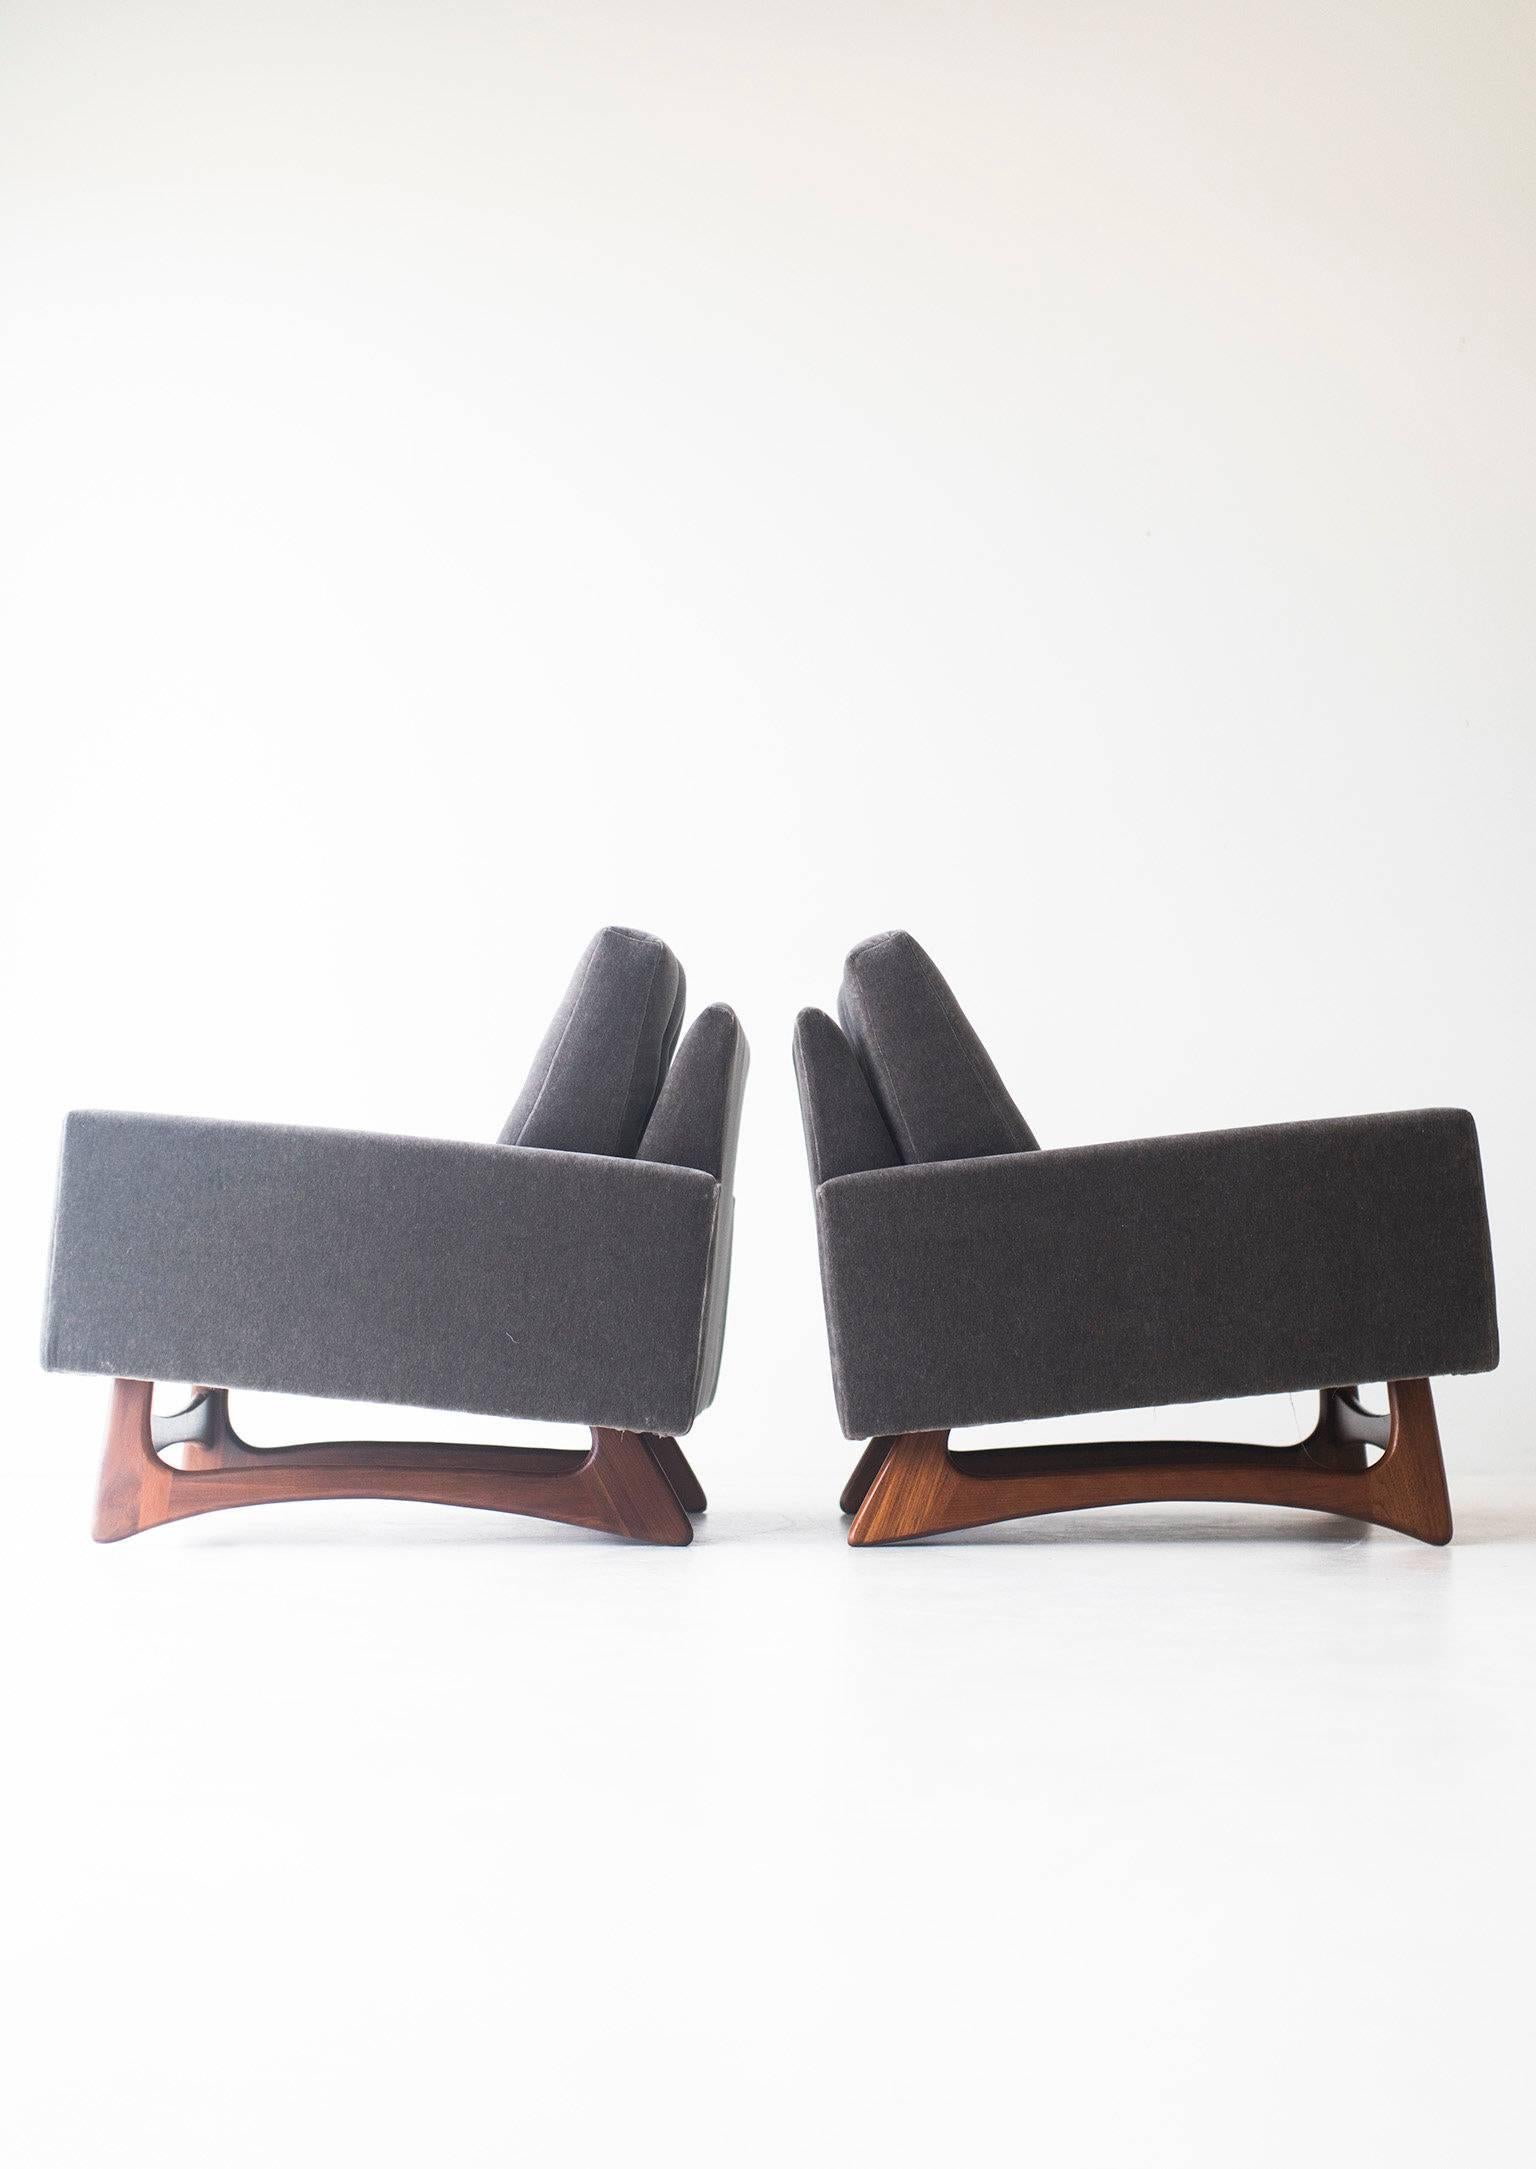 Mid-20th Century Adrian Pearsall Lounge Chairs for Craft Associates Inc.